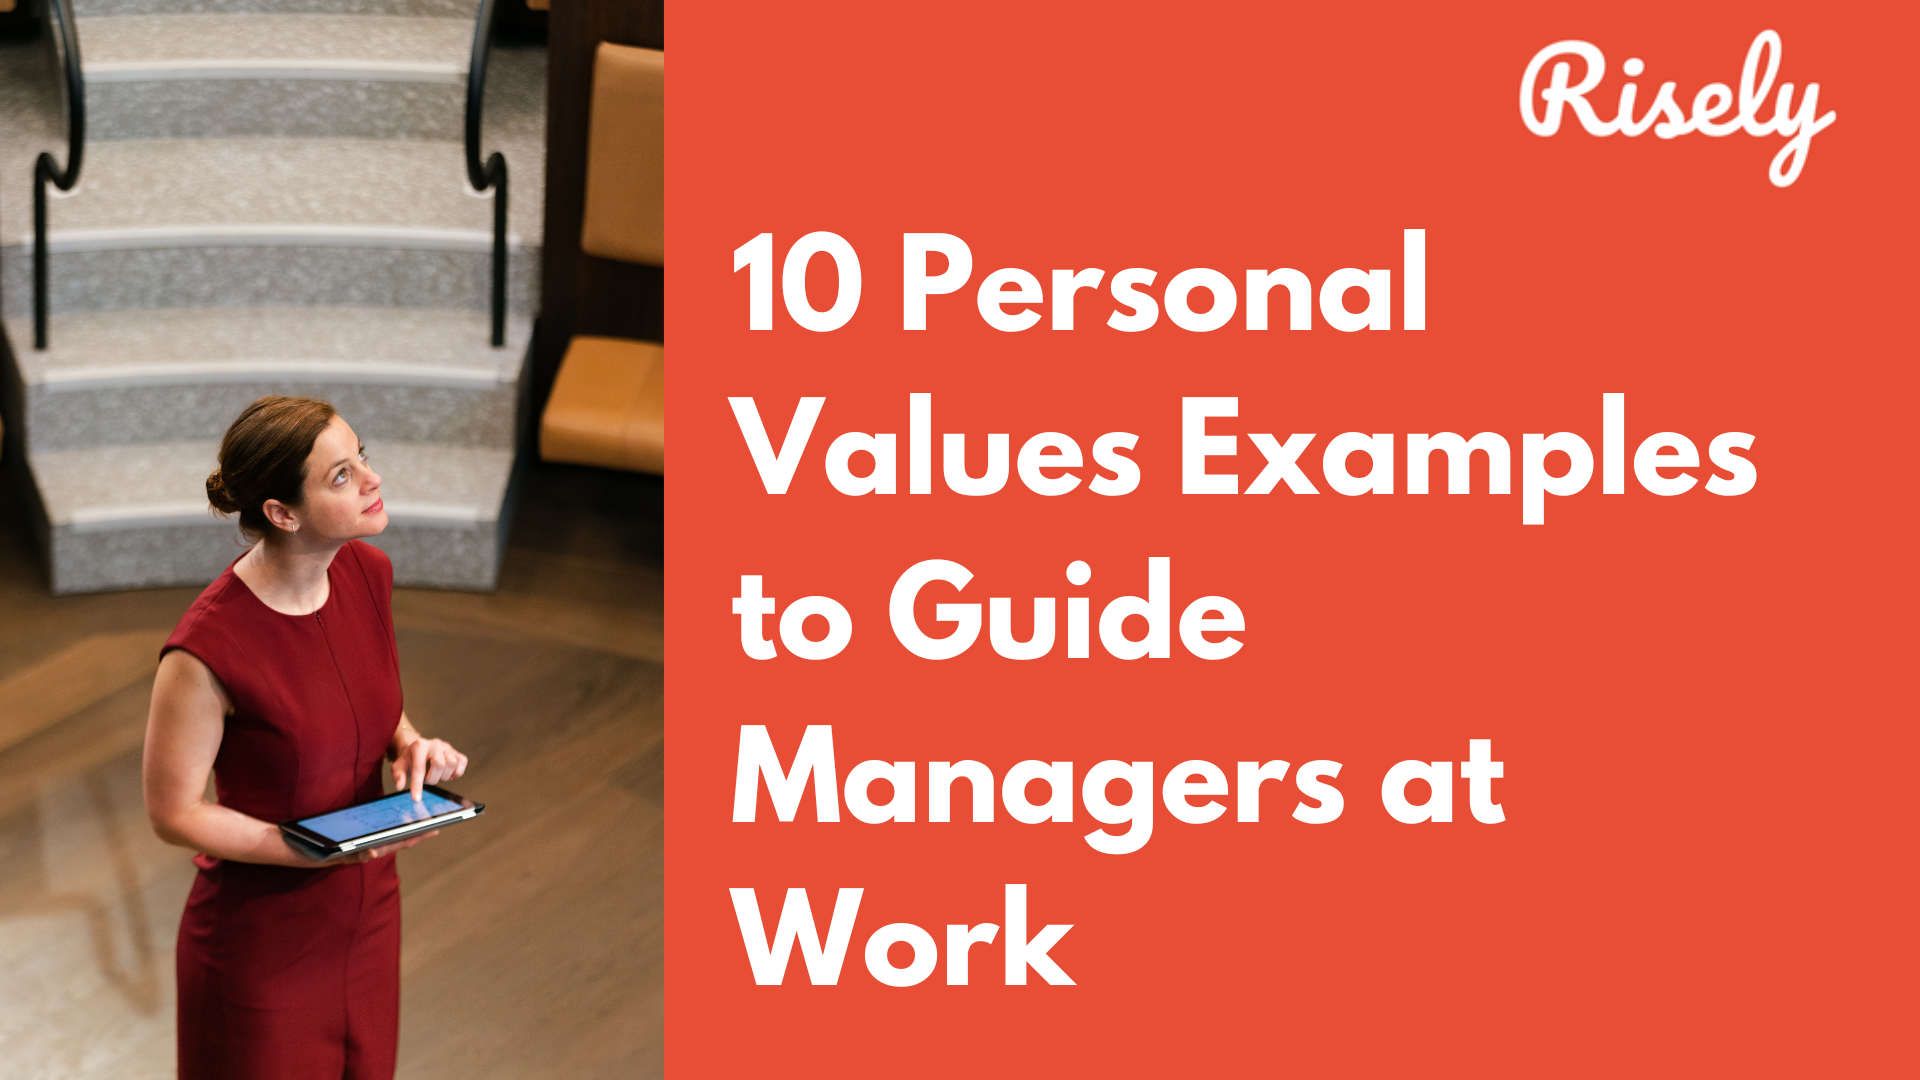 10 Personal Values Examples to Guide Managers at Work